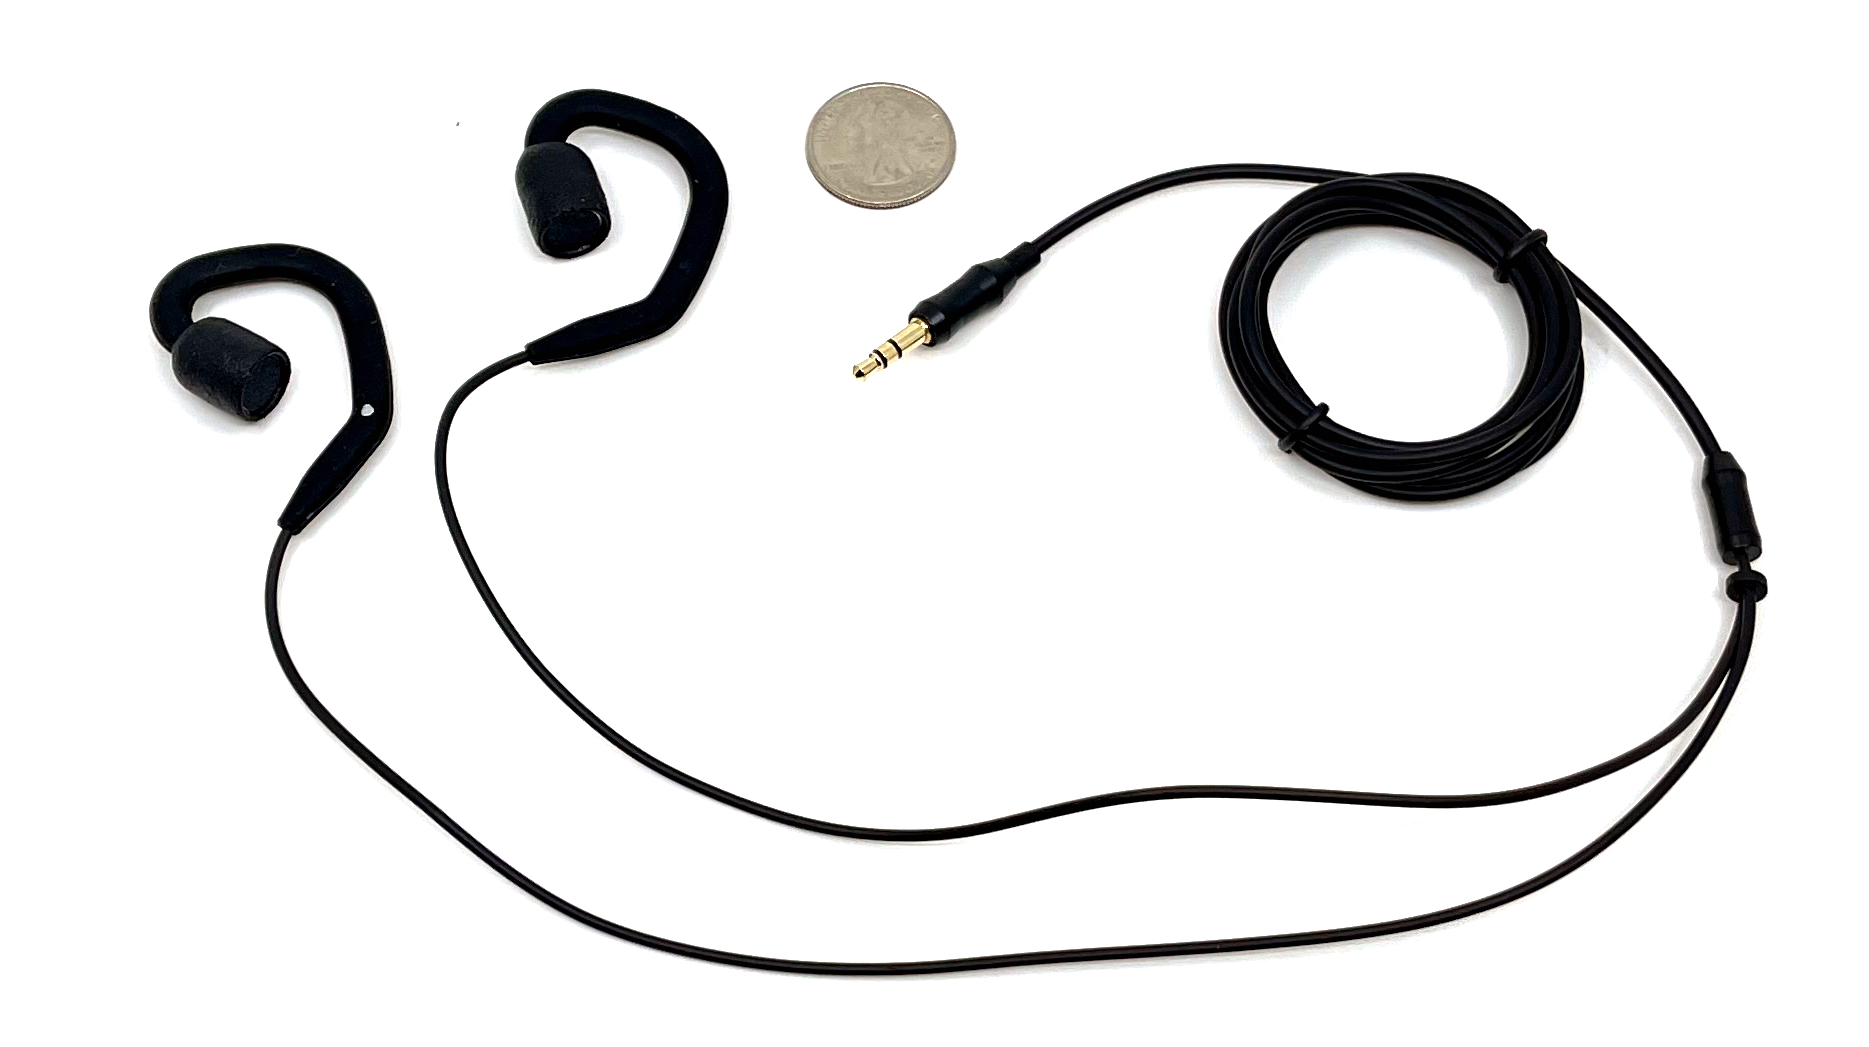 MS-EHB-2-MKII - Ultra-low noise studio quality Ear-mounted Binaural microphone Questions & Answers